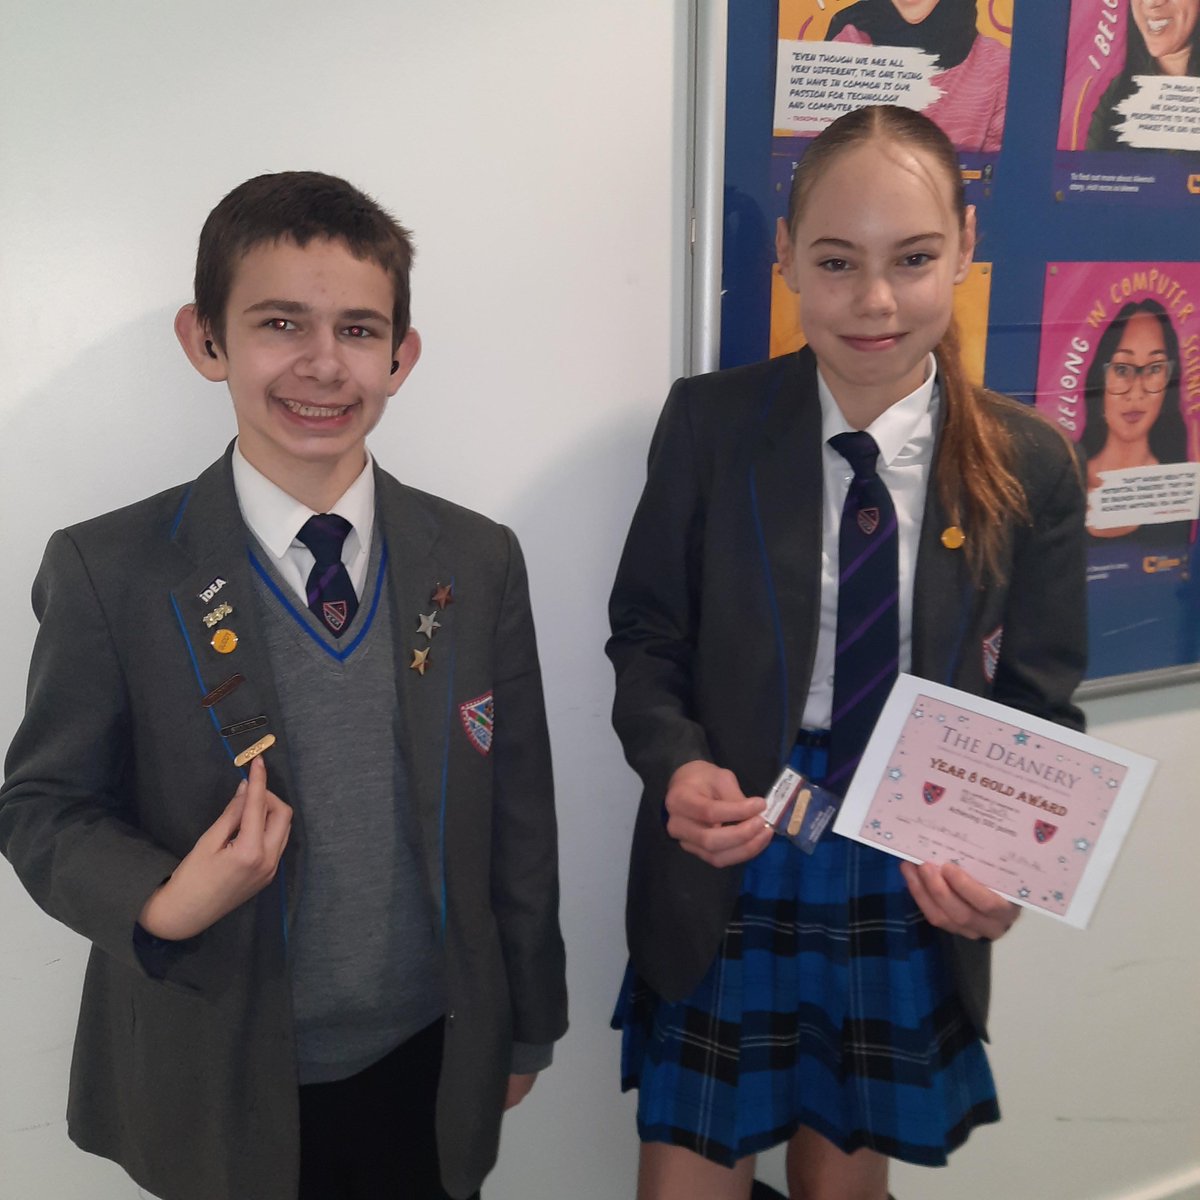 Well done to Bethan and Mikey. Year 8 gold flourish badge winners for achievement points.